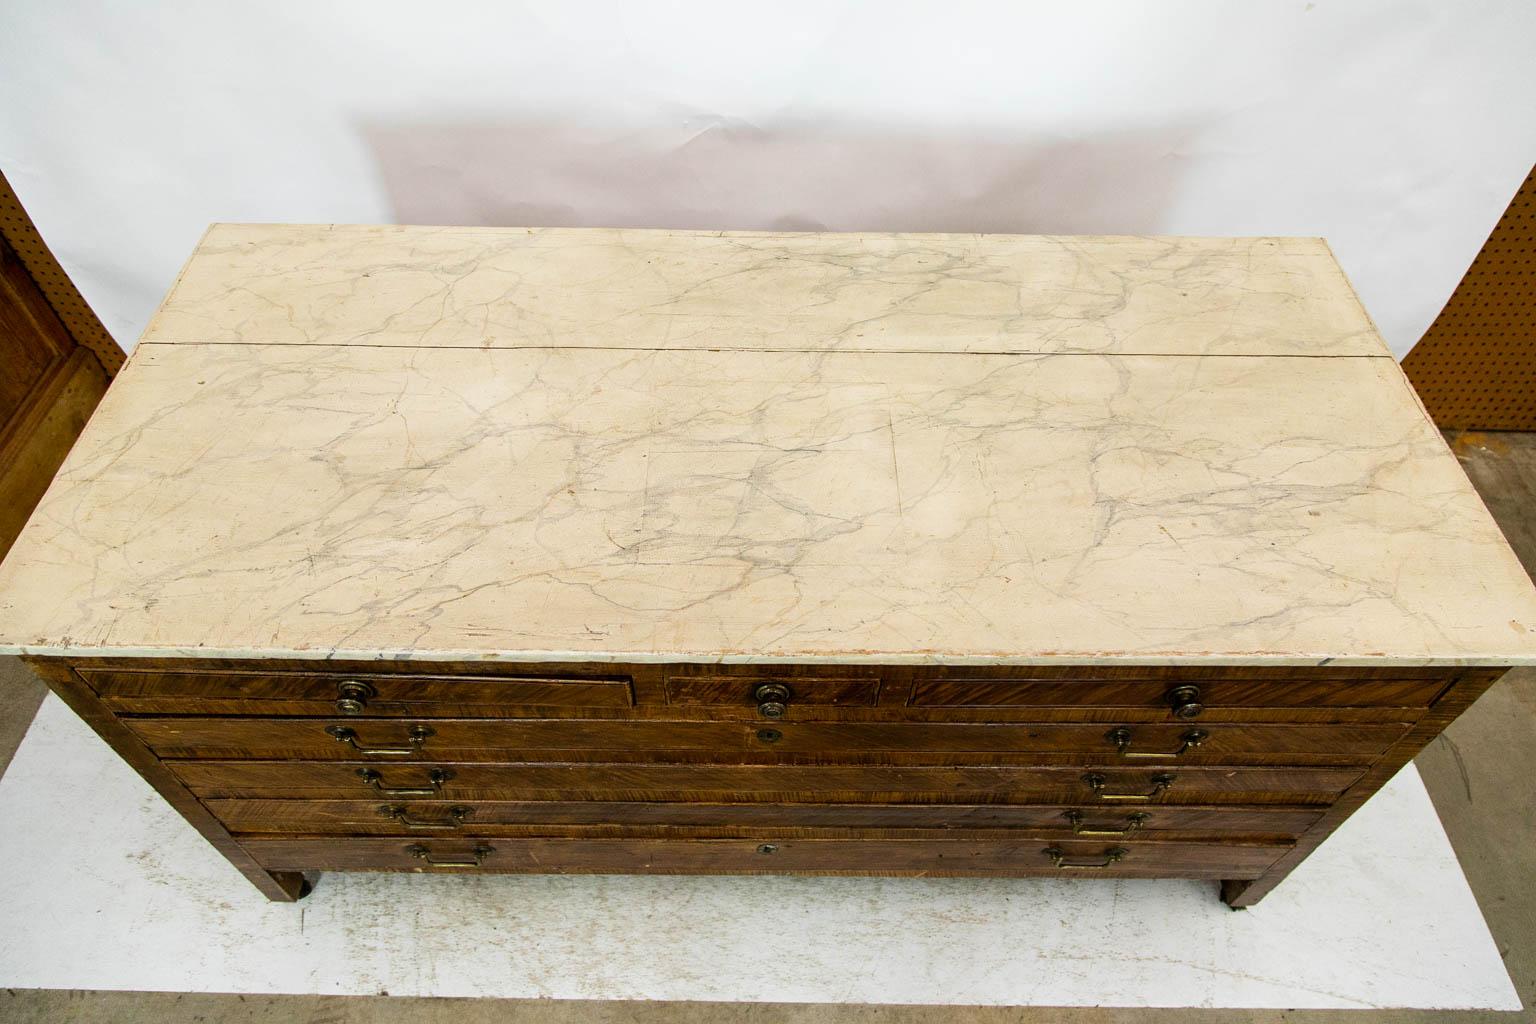 The top of this English portfolio chest is faux painted to simulate white marble with gray and tan veining. It has a one inch shrinkage separation in the top and an apparent square repair in the middle that was done before the faux painting. The